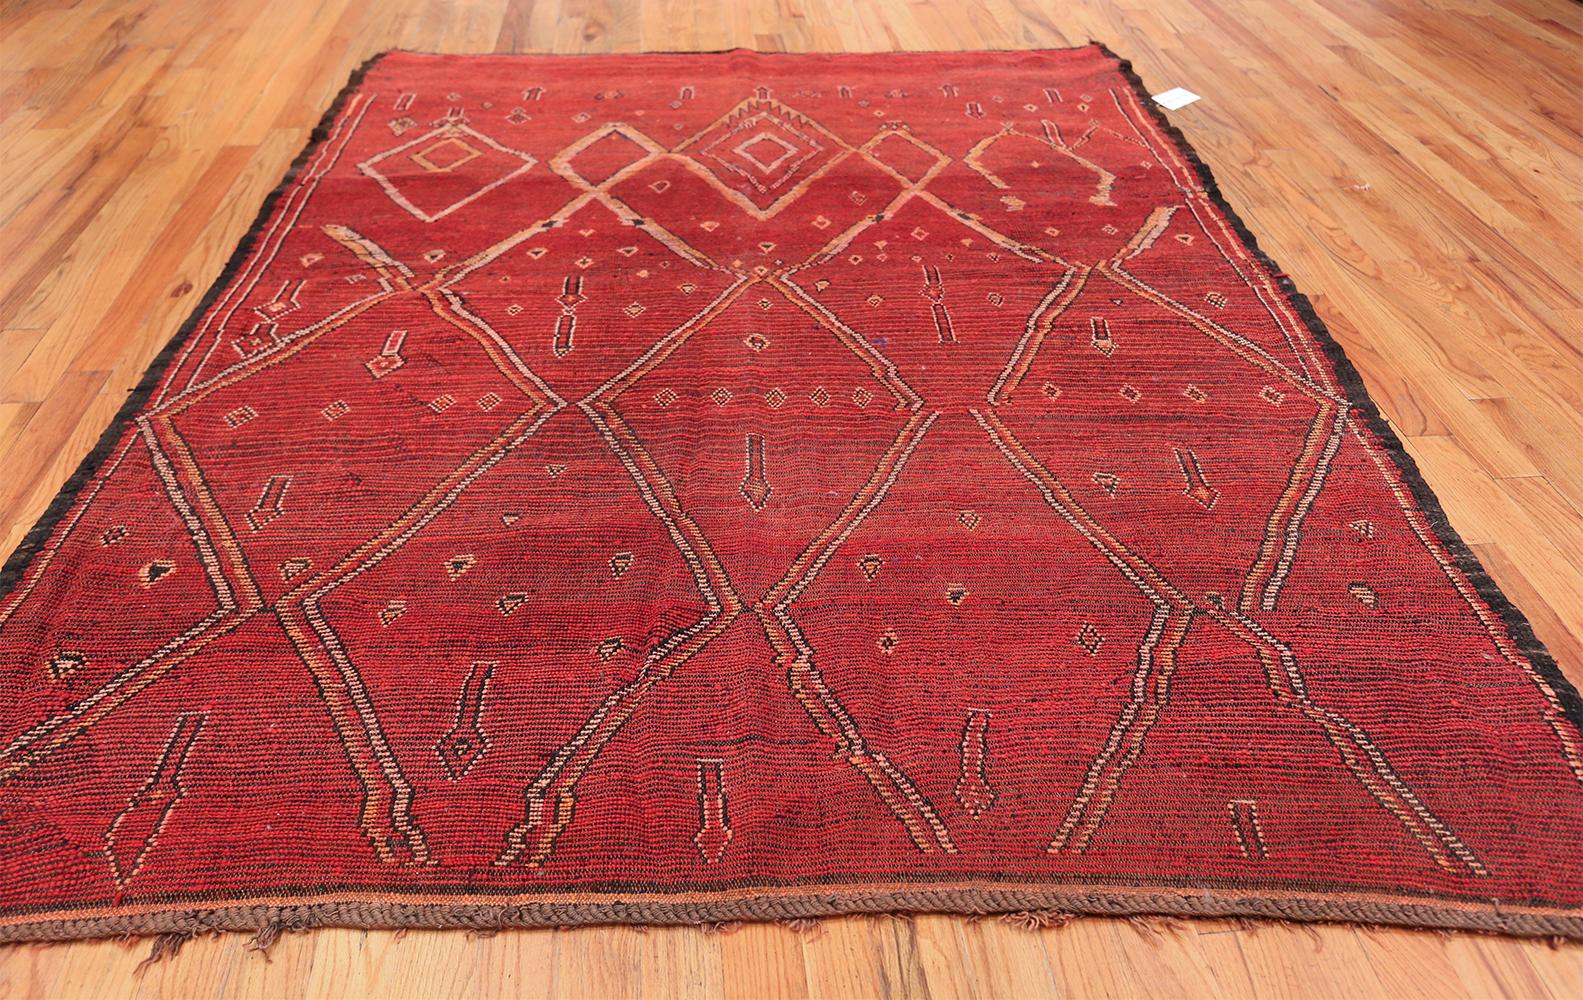 Beautiful double-sided Vintage Moroccan rug, Country of Origin / Rug Type: Morocco, circa Date: Mid-20th century
Vintage Moroccan rugs and carpets and carpets are among the more popular styles available today. These unique and exciting creations